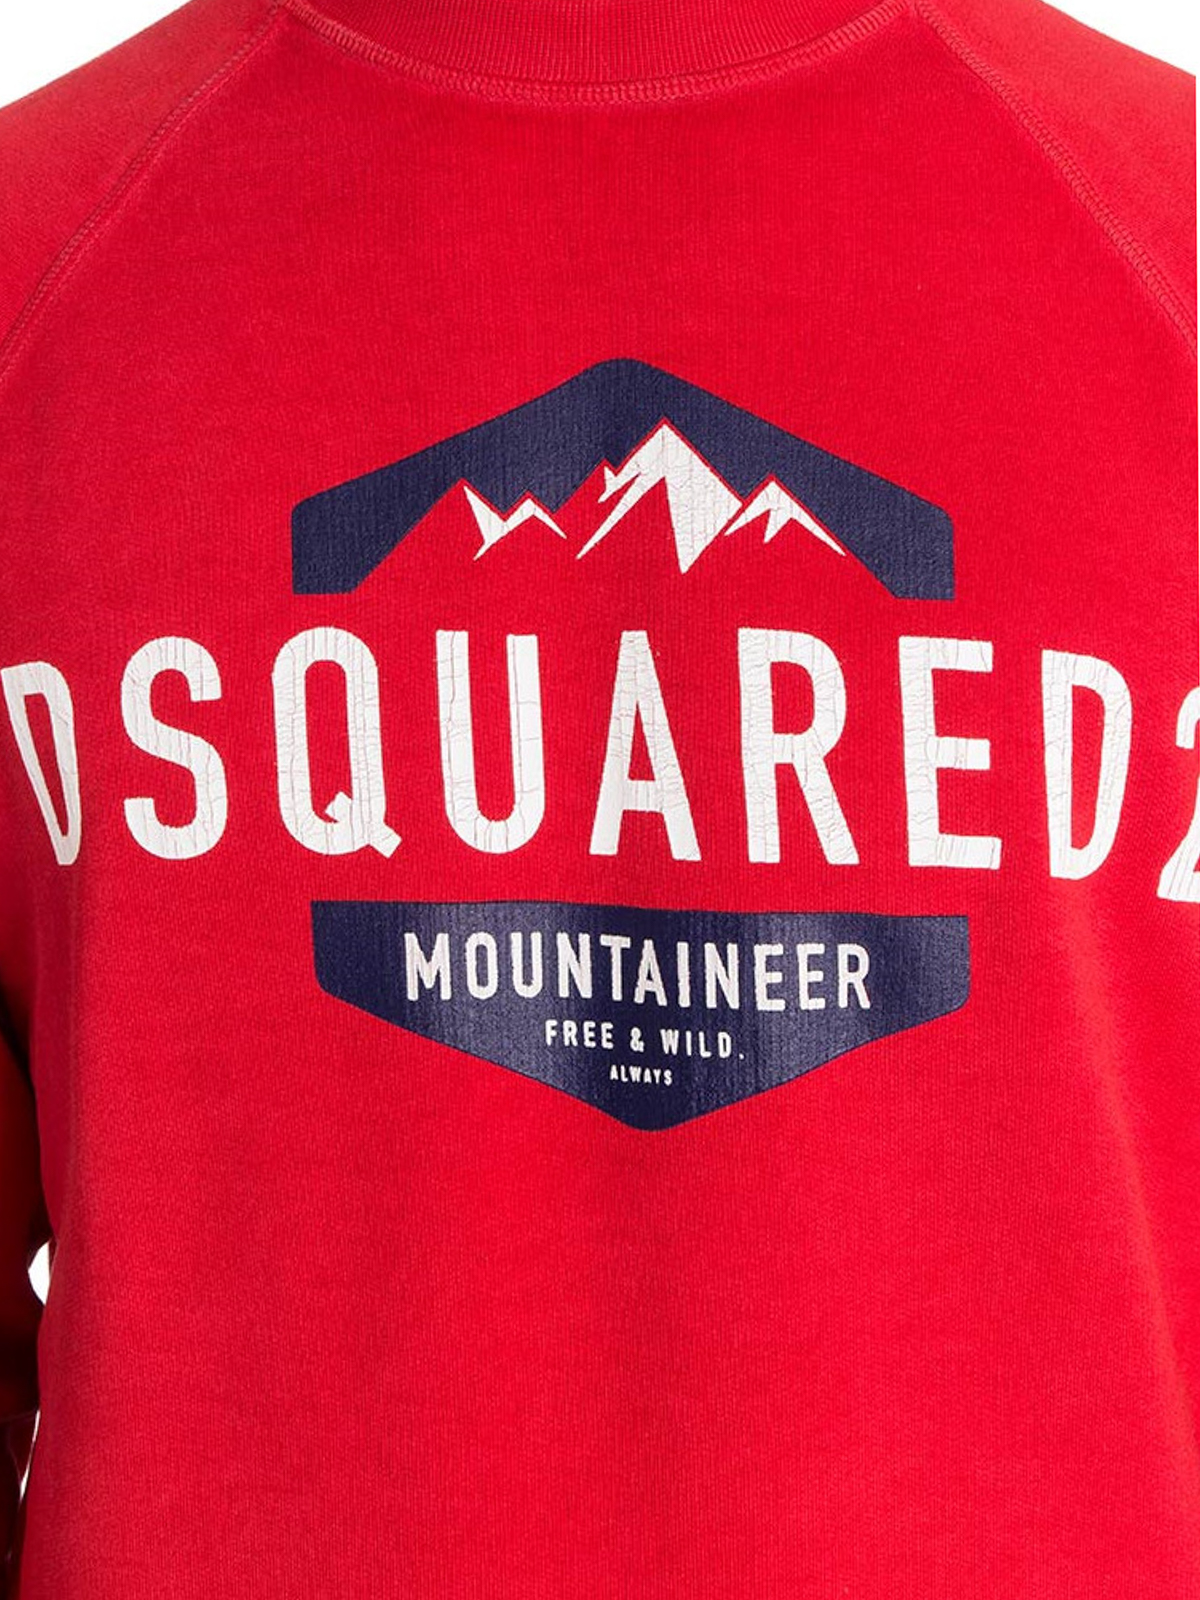 sweat dsquared2 mountaineer